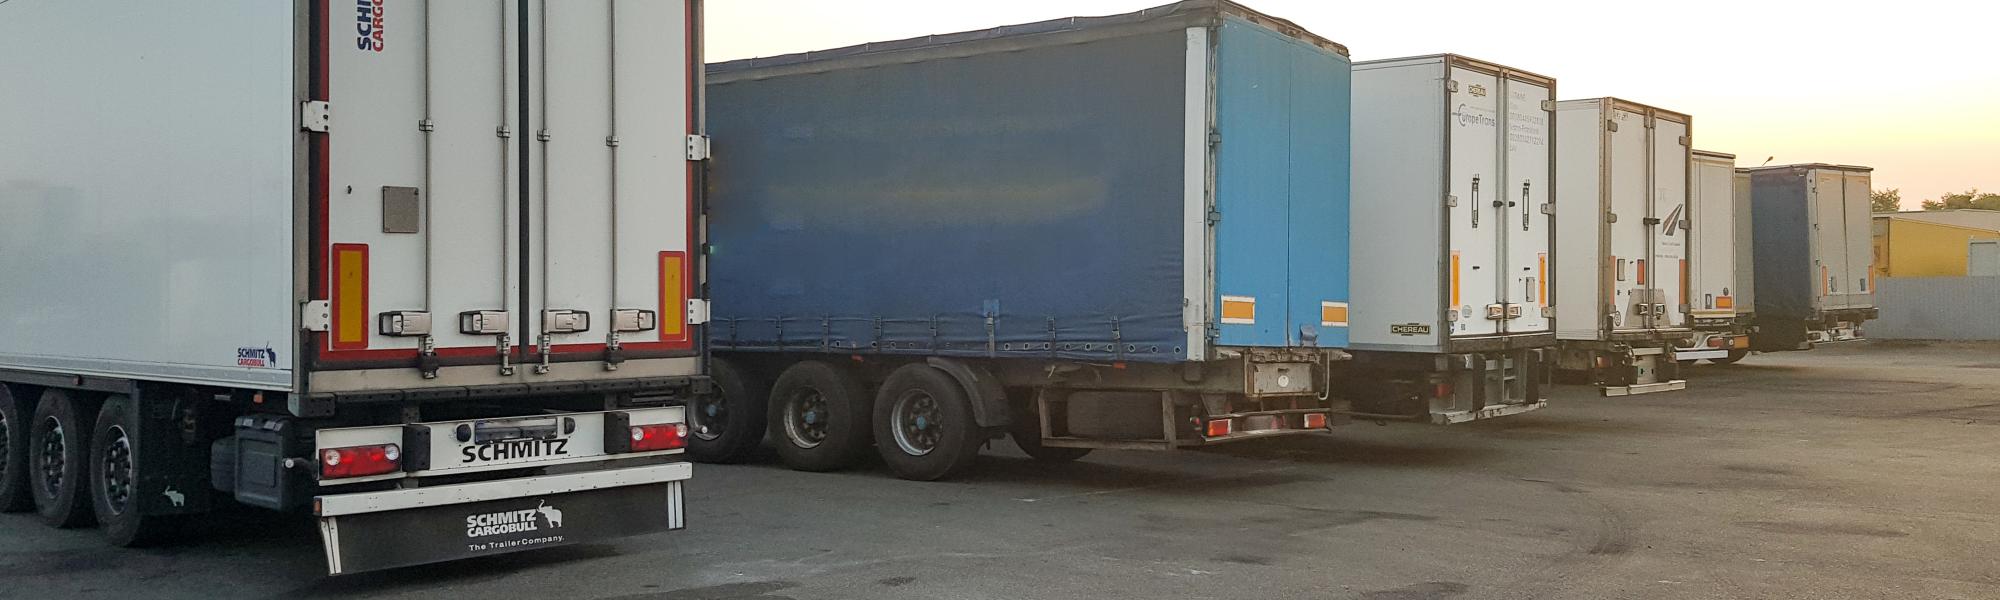 IRU urges Ukrainian government to take urgent action to release stranded drivers and cargo